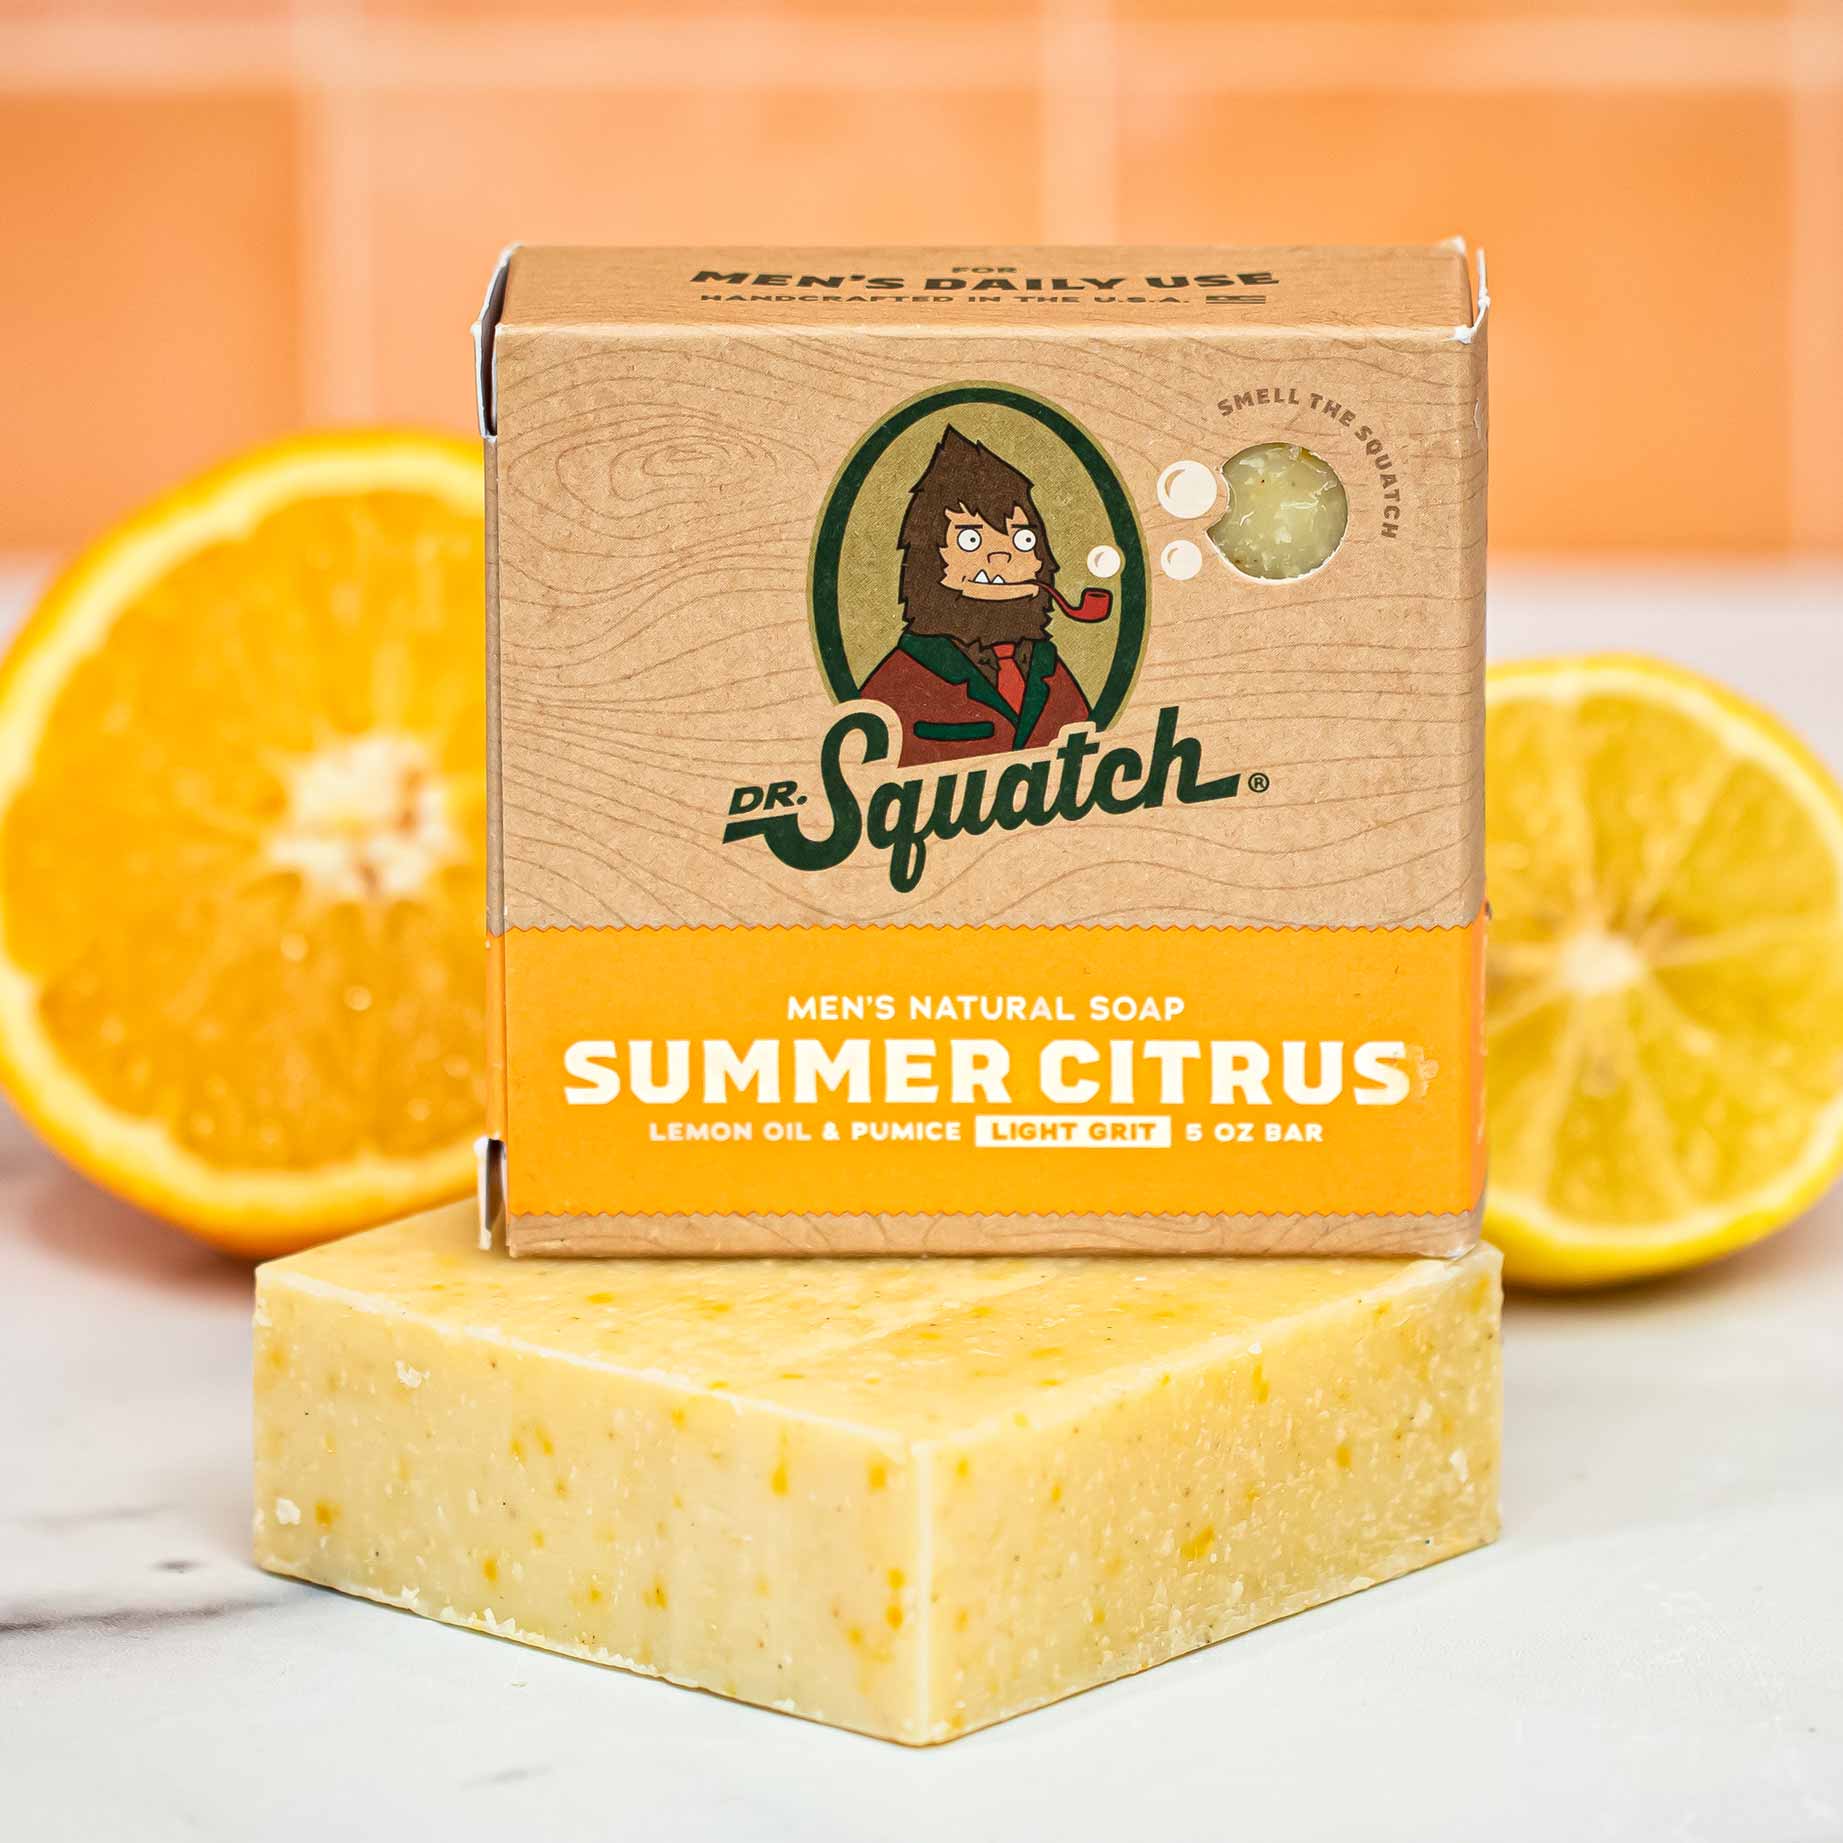 Dr. Squatch - Have your locks smell like summer (citrus) all year